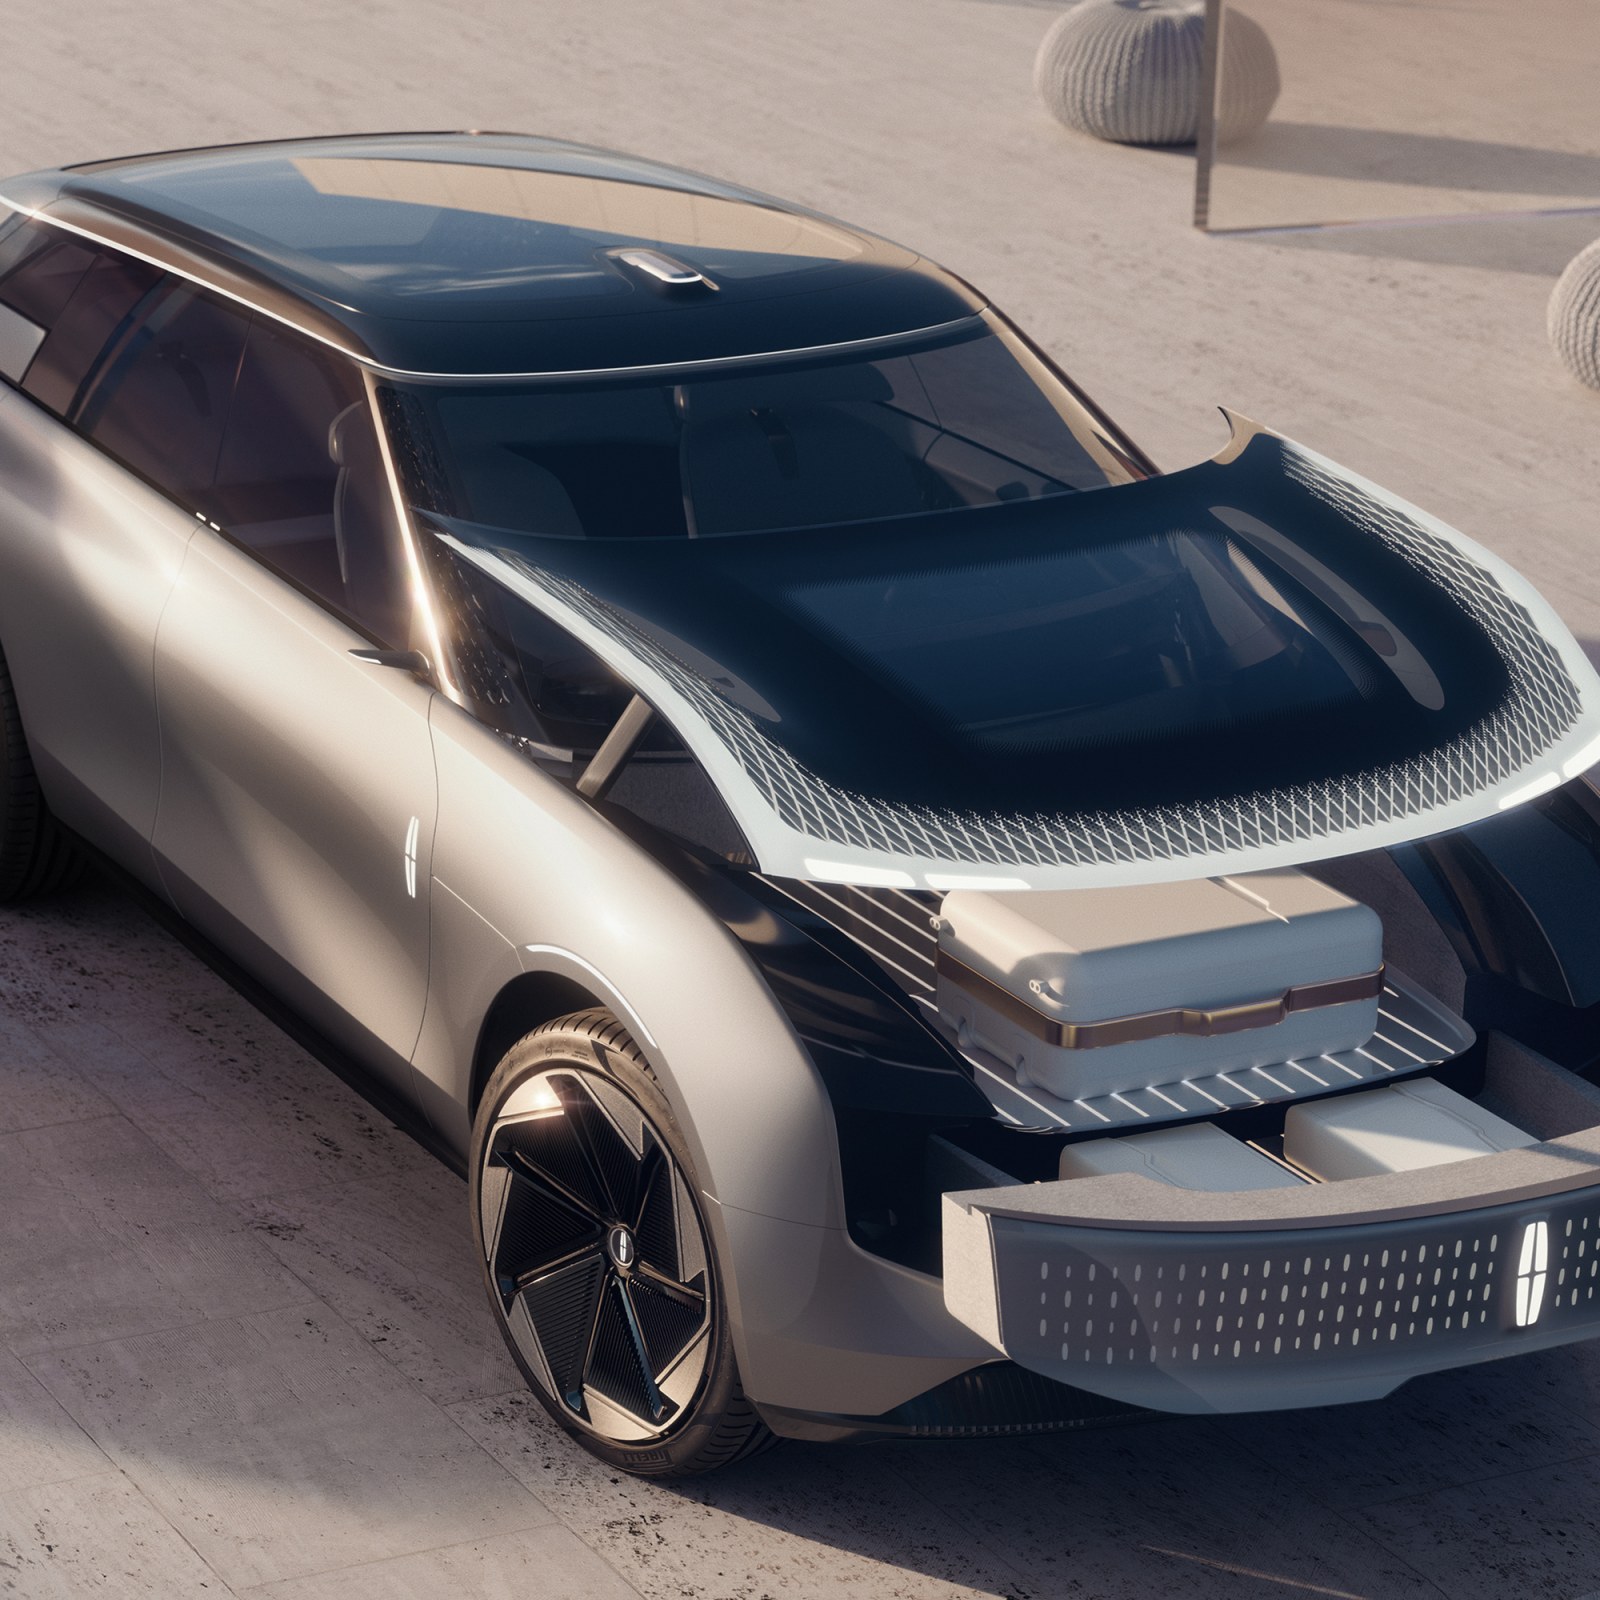 Star Concept Is a Peek Into Lincoln's Electric Vehicle Future